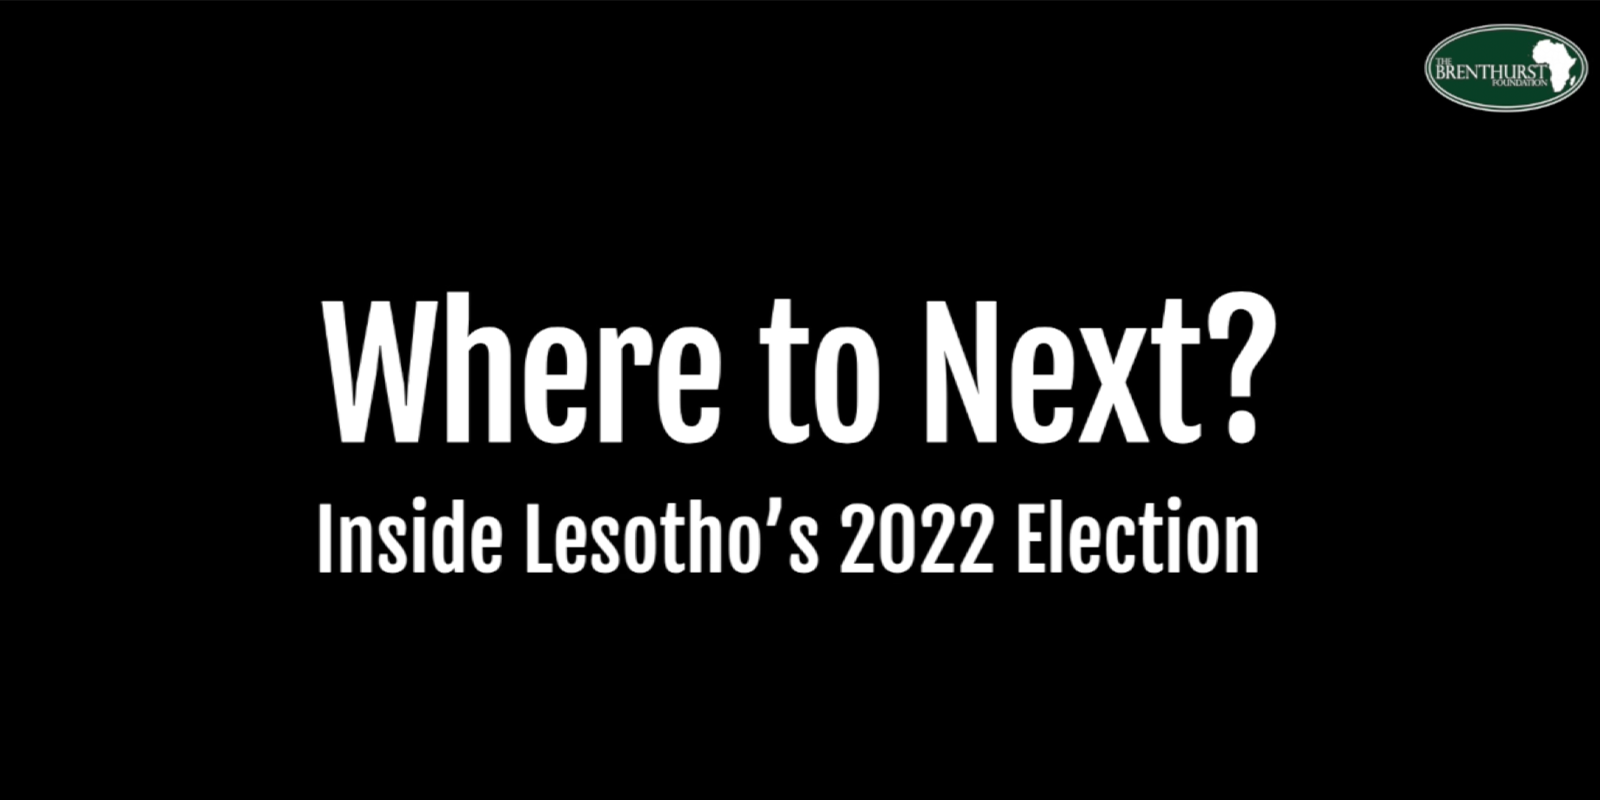 Where to Next?: Inside Lesotho's 2022 Election